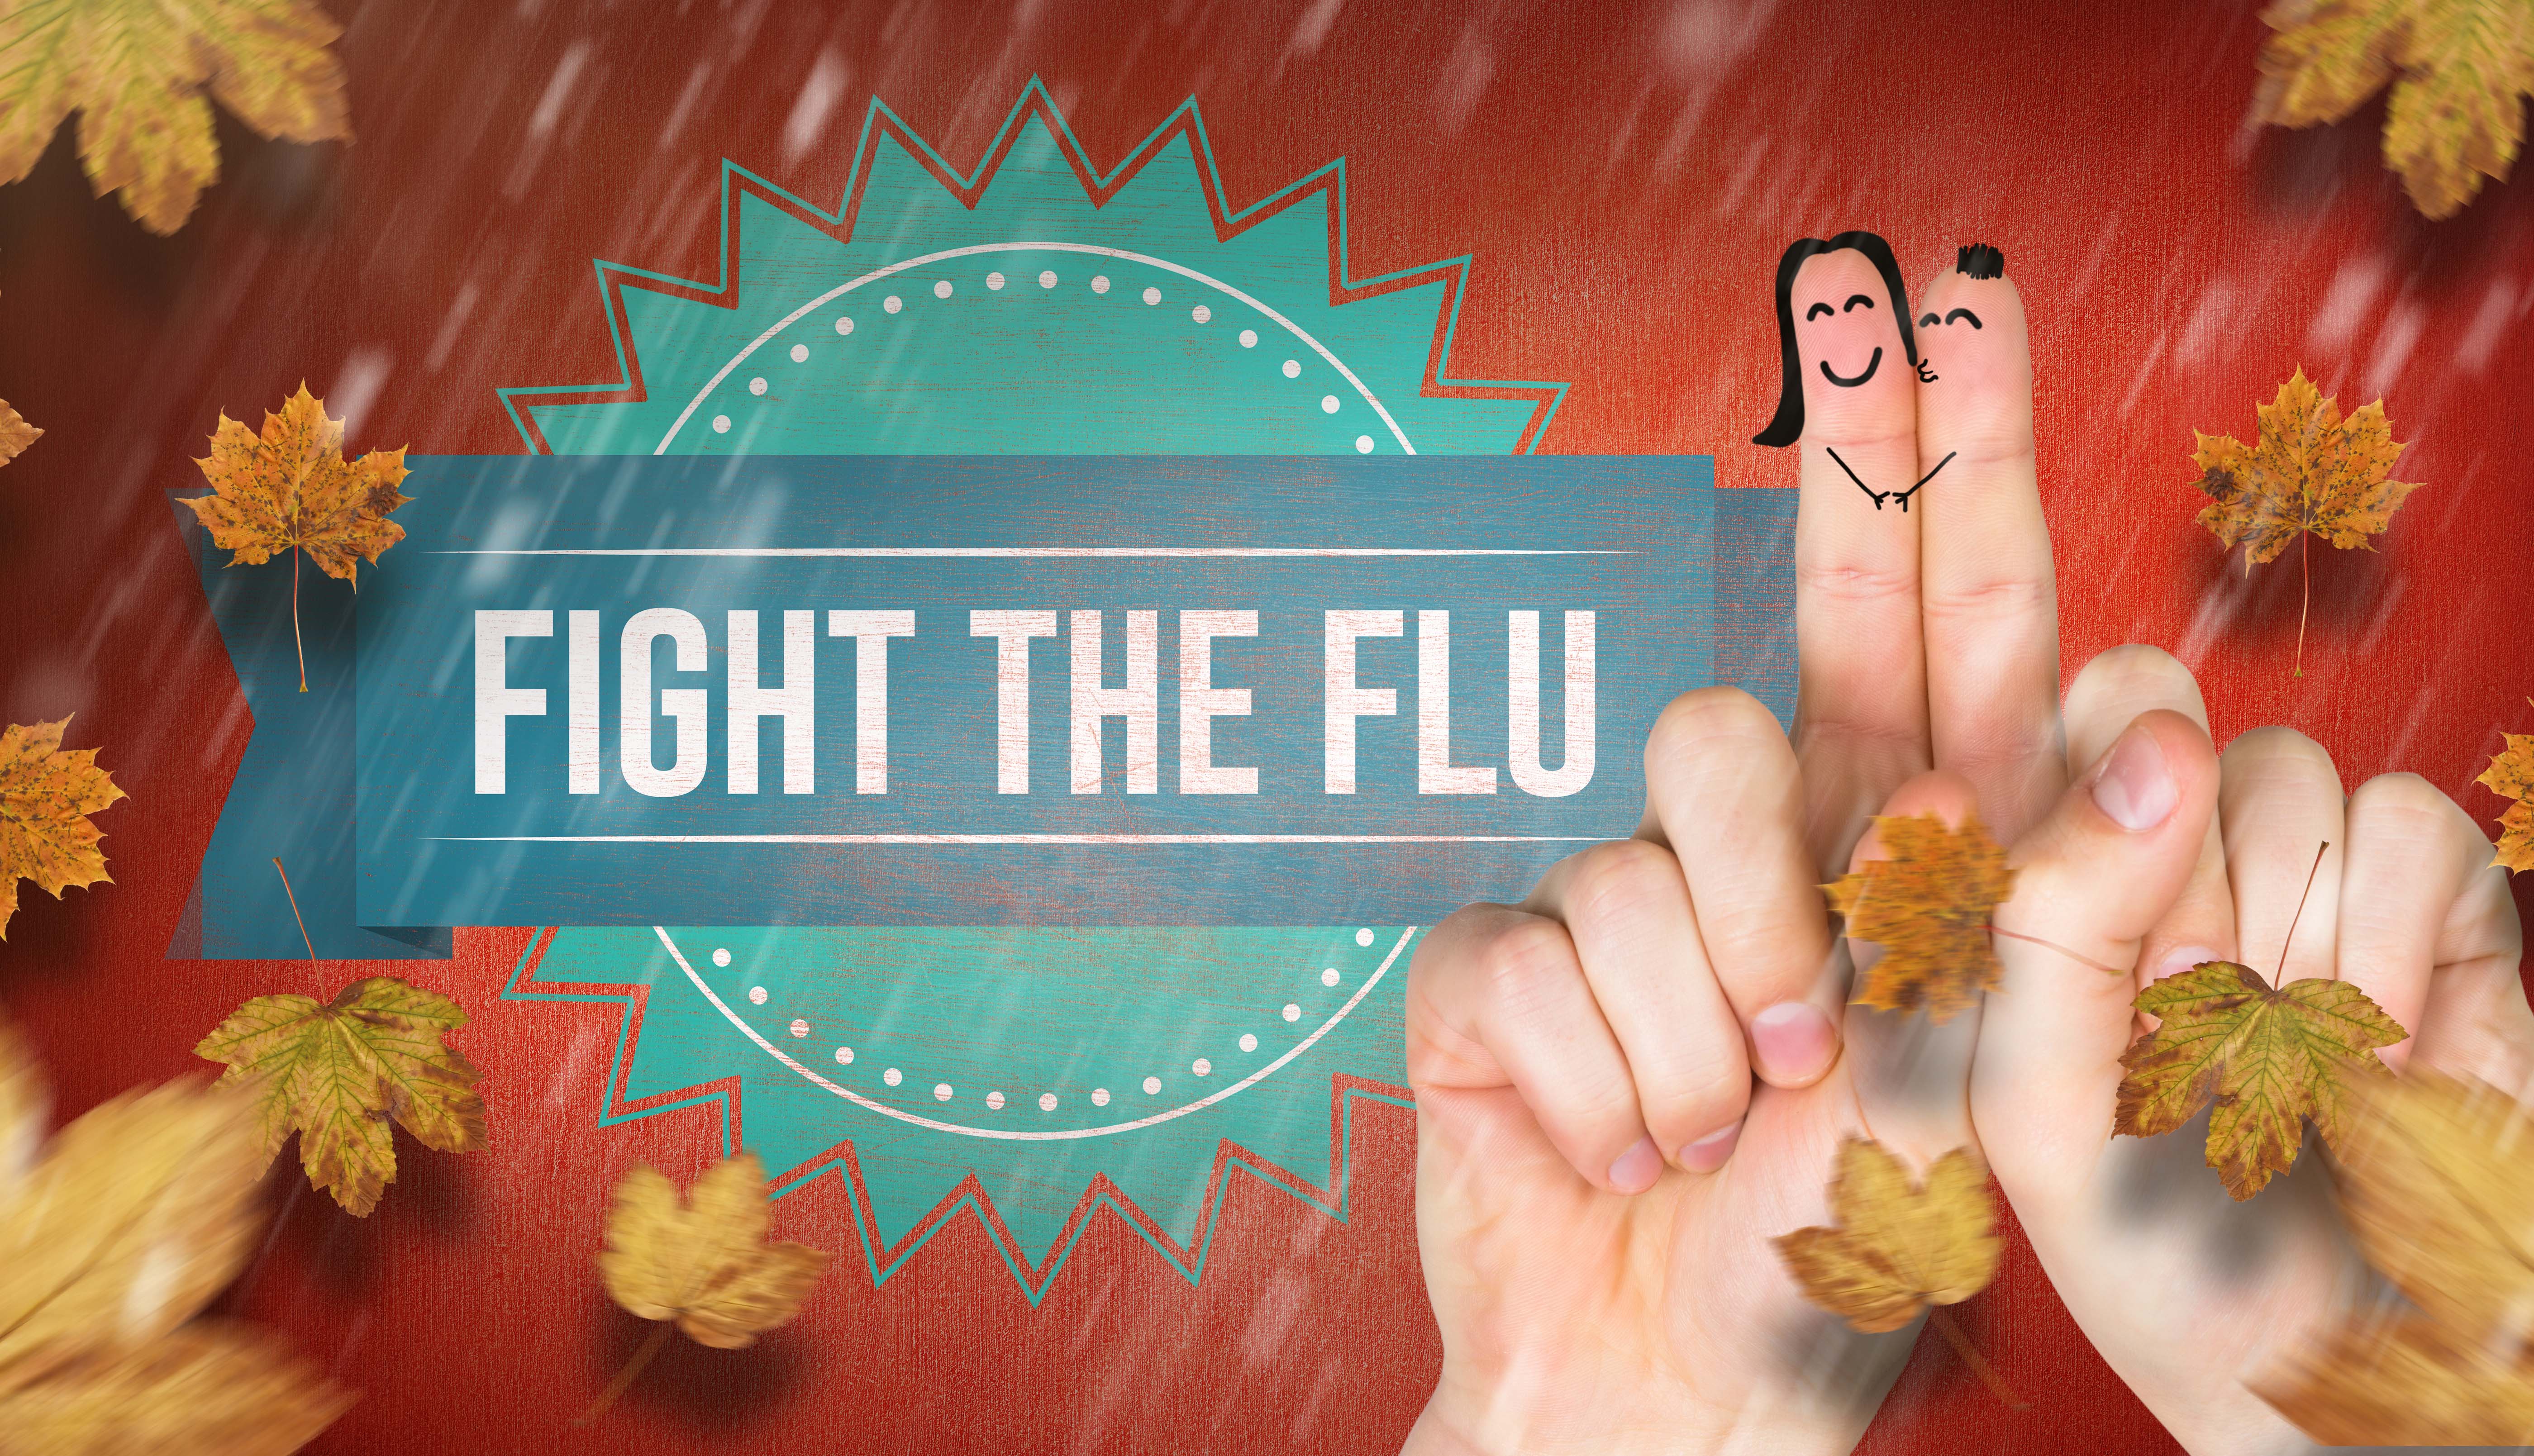 7 Steps to Staying Healthy During FLU Season